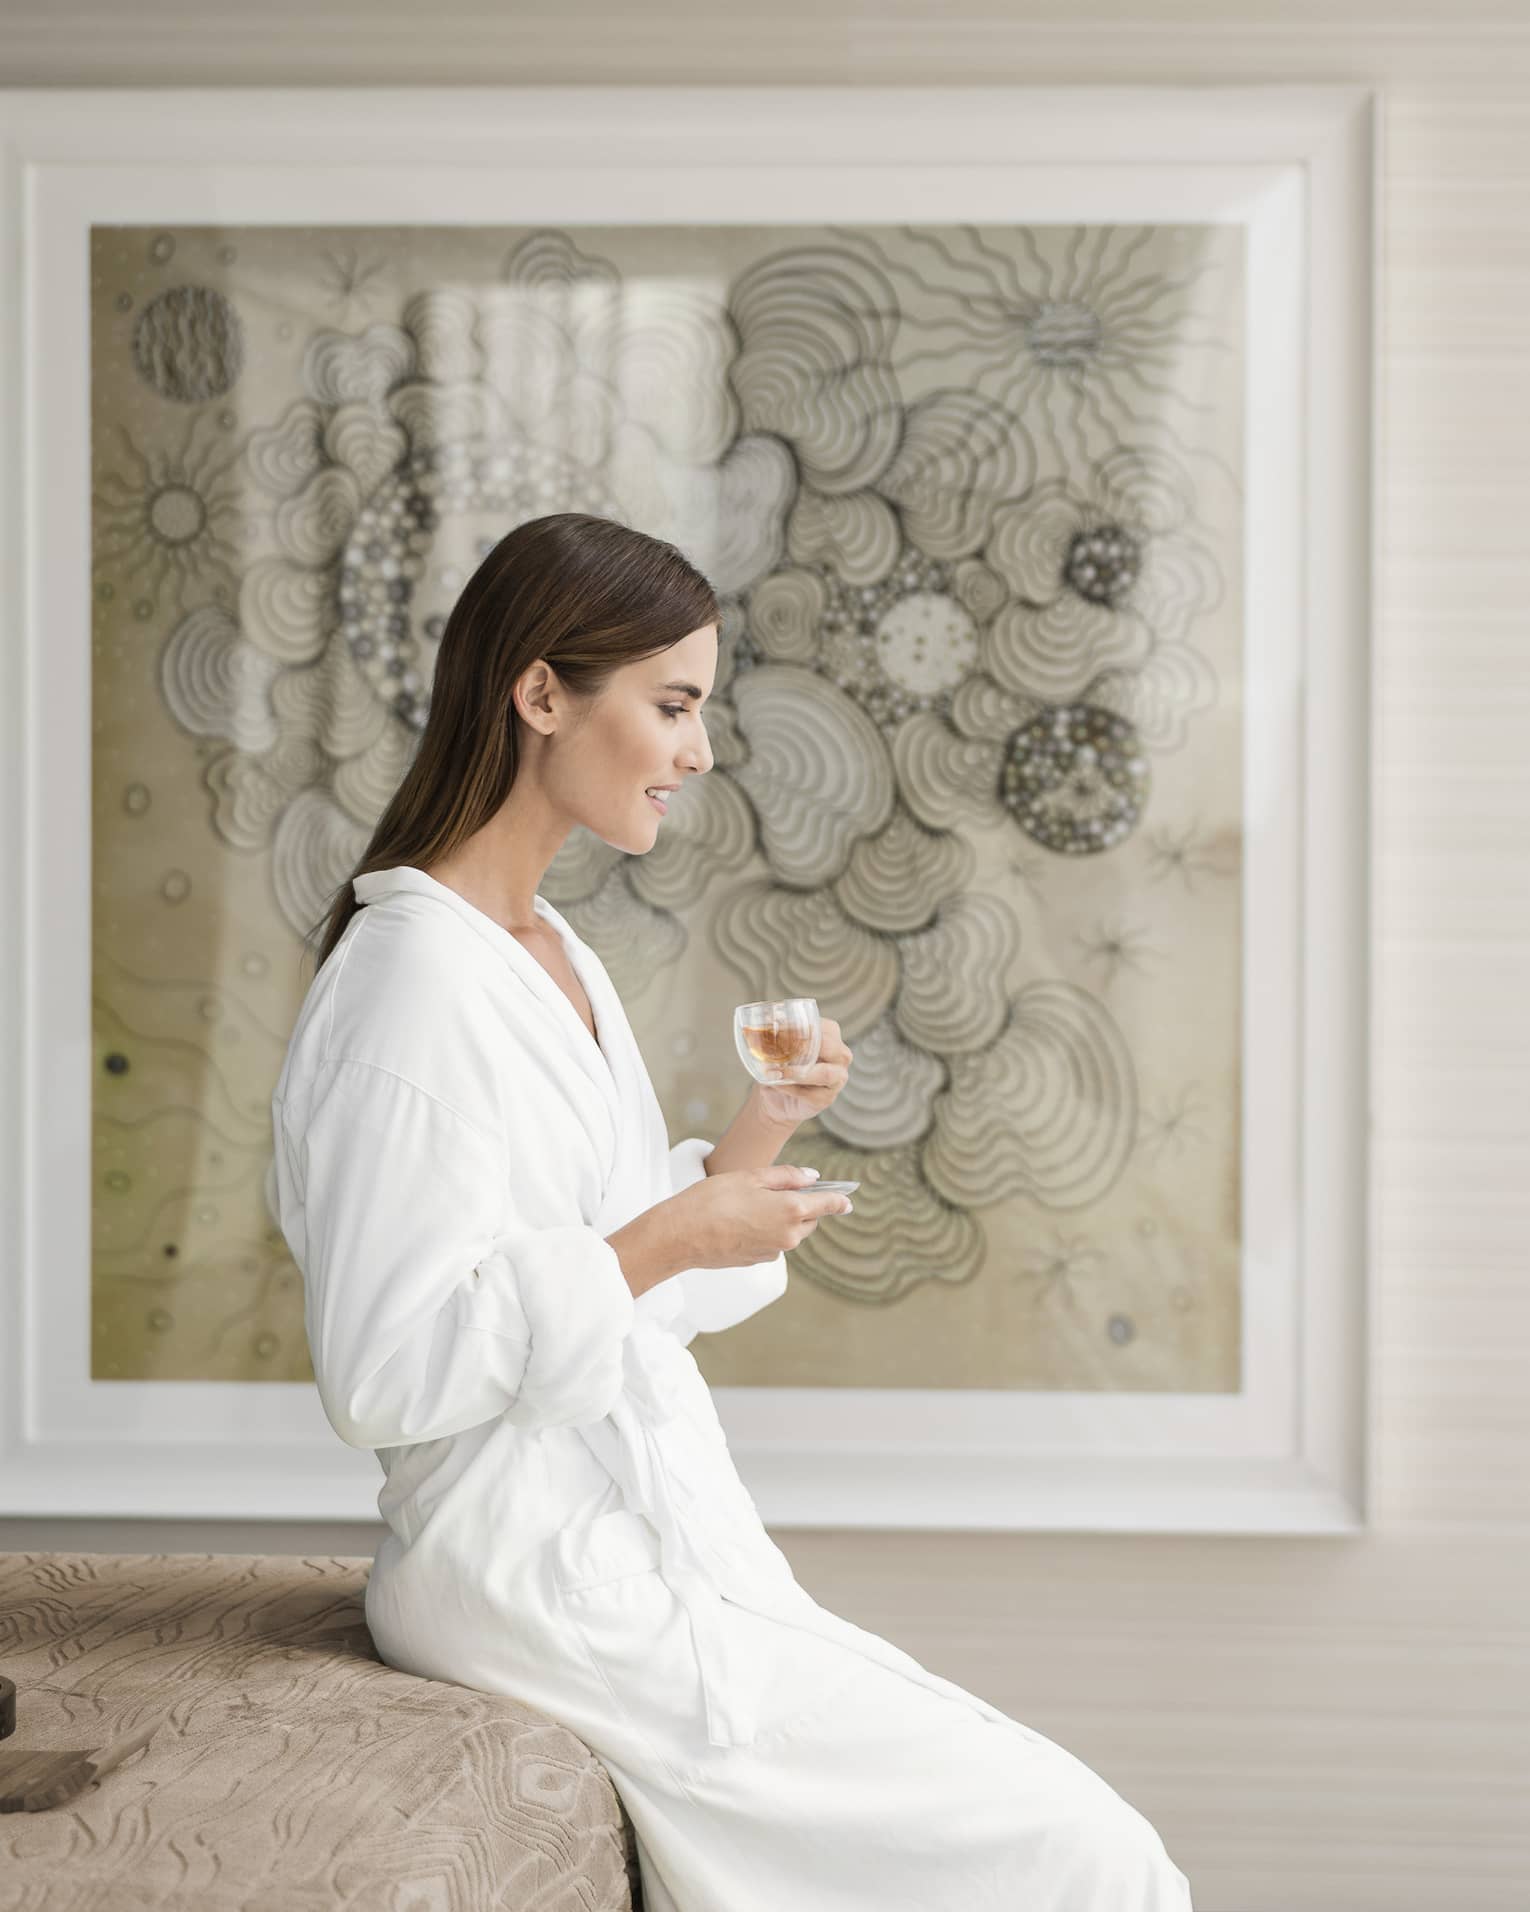 A woman in a white robe sipping from a small glass in front of a framed portrait.